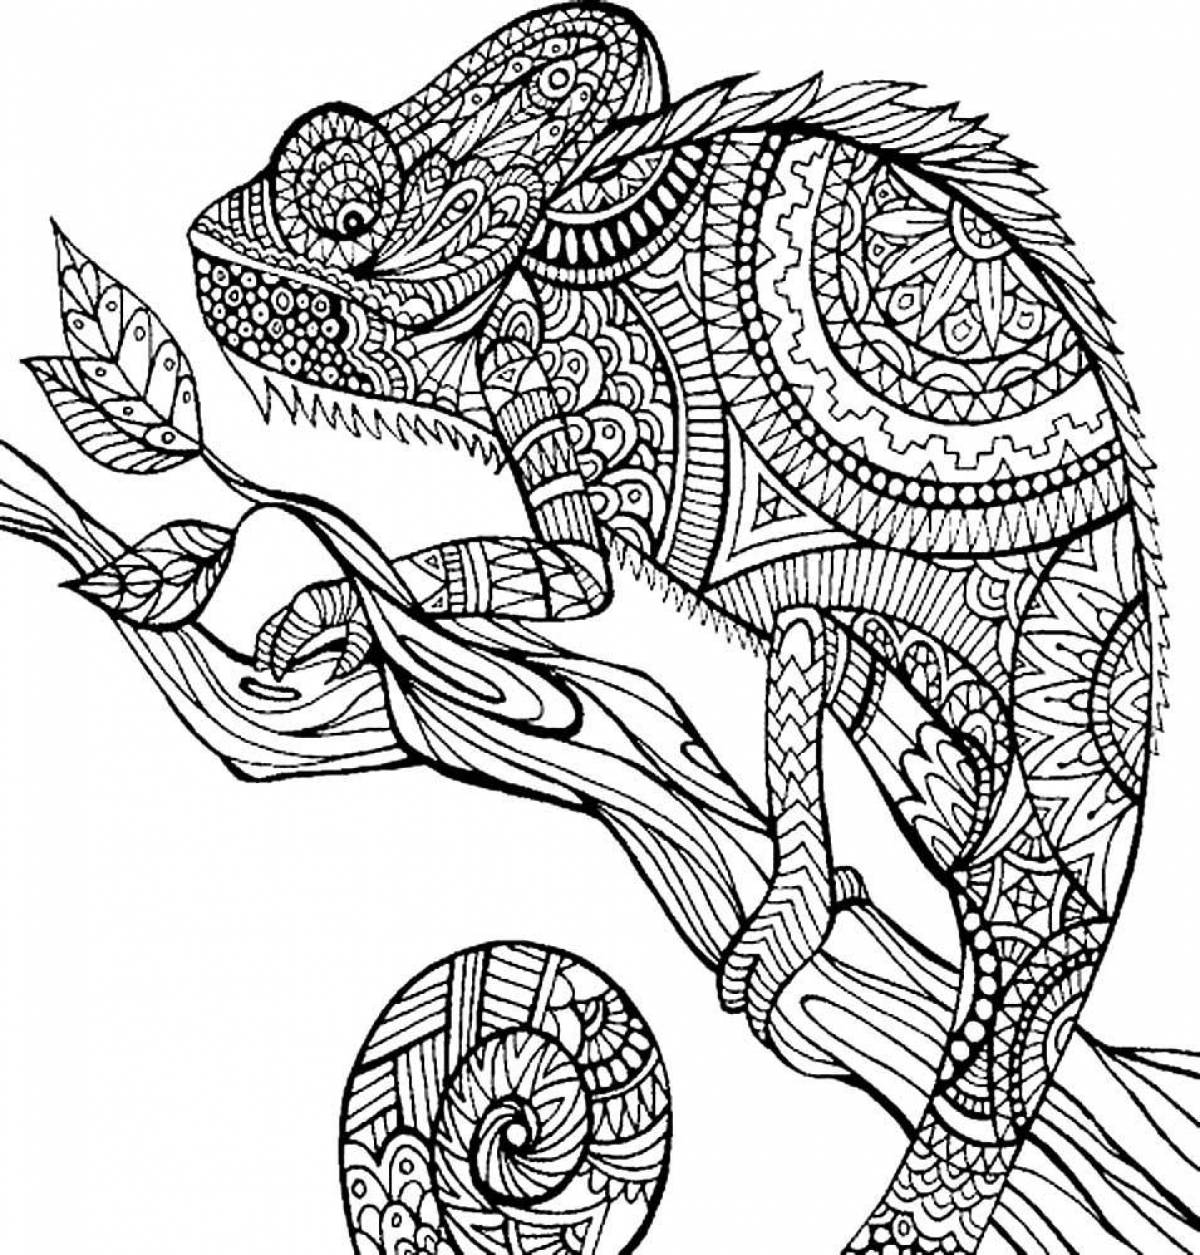 Awesome complex coloring book